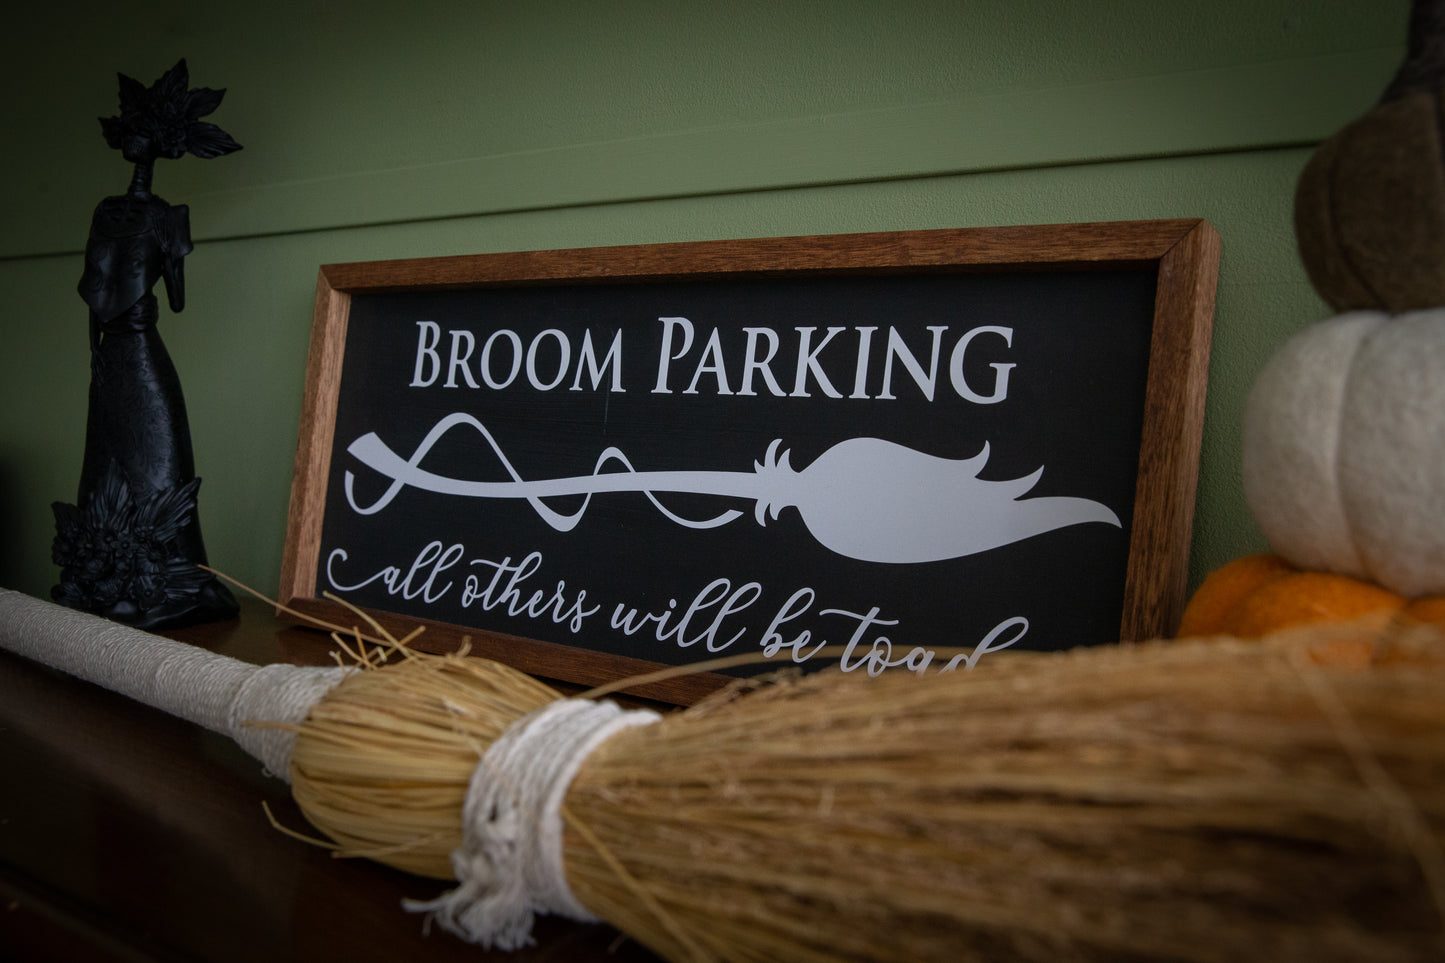 Broom Parking - all others will be toad